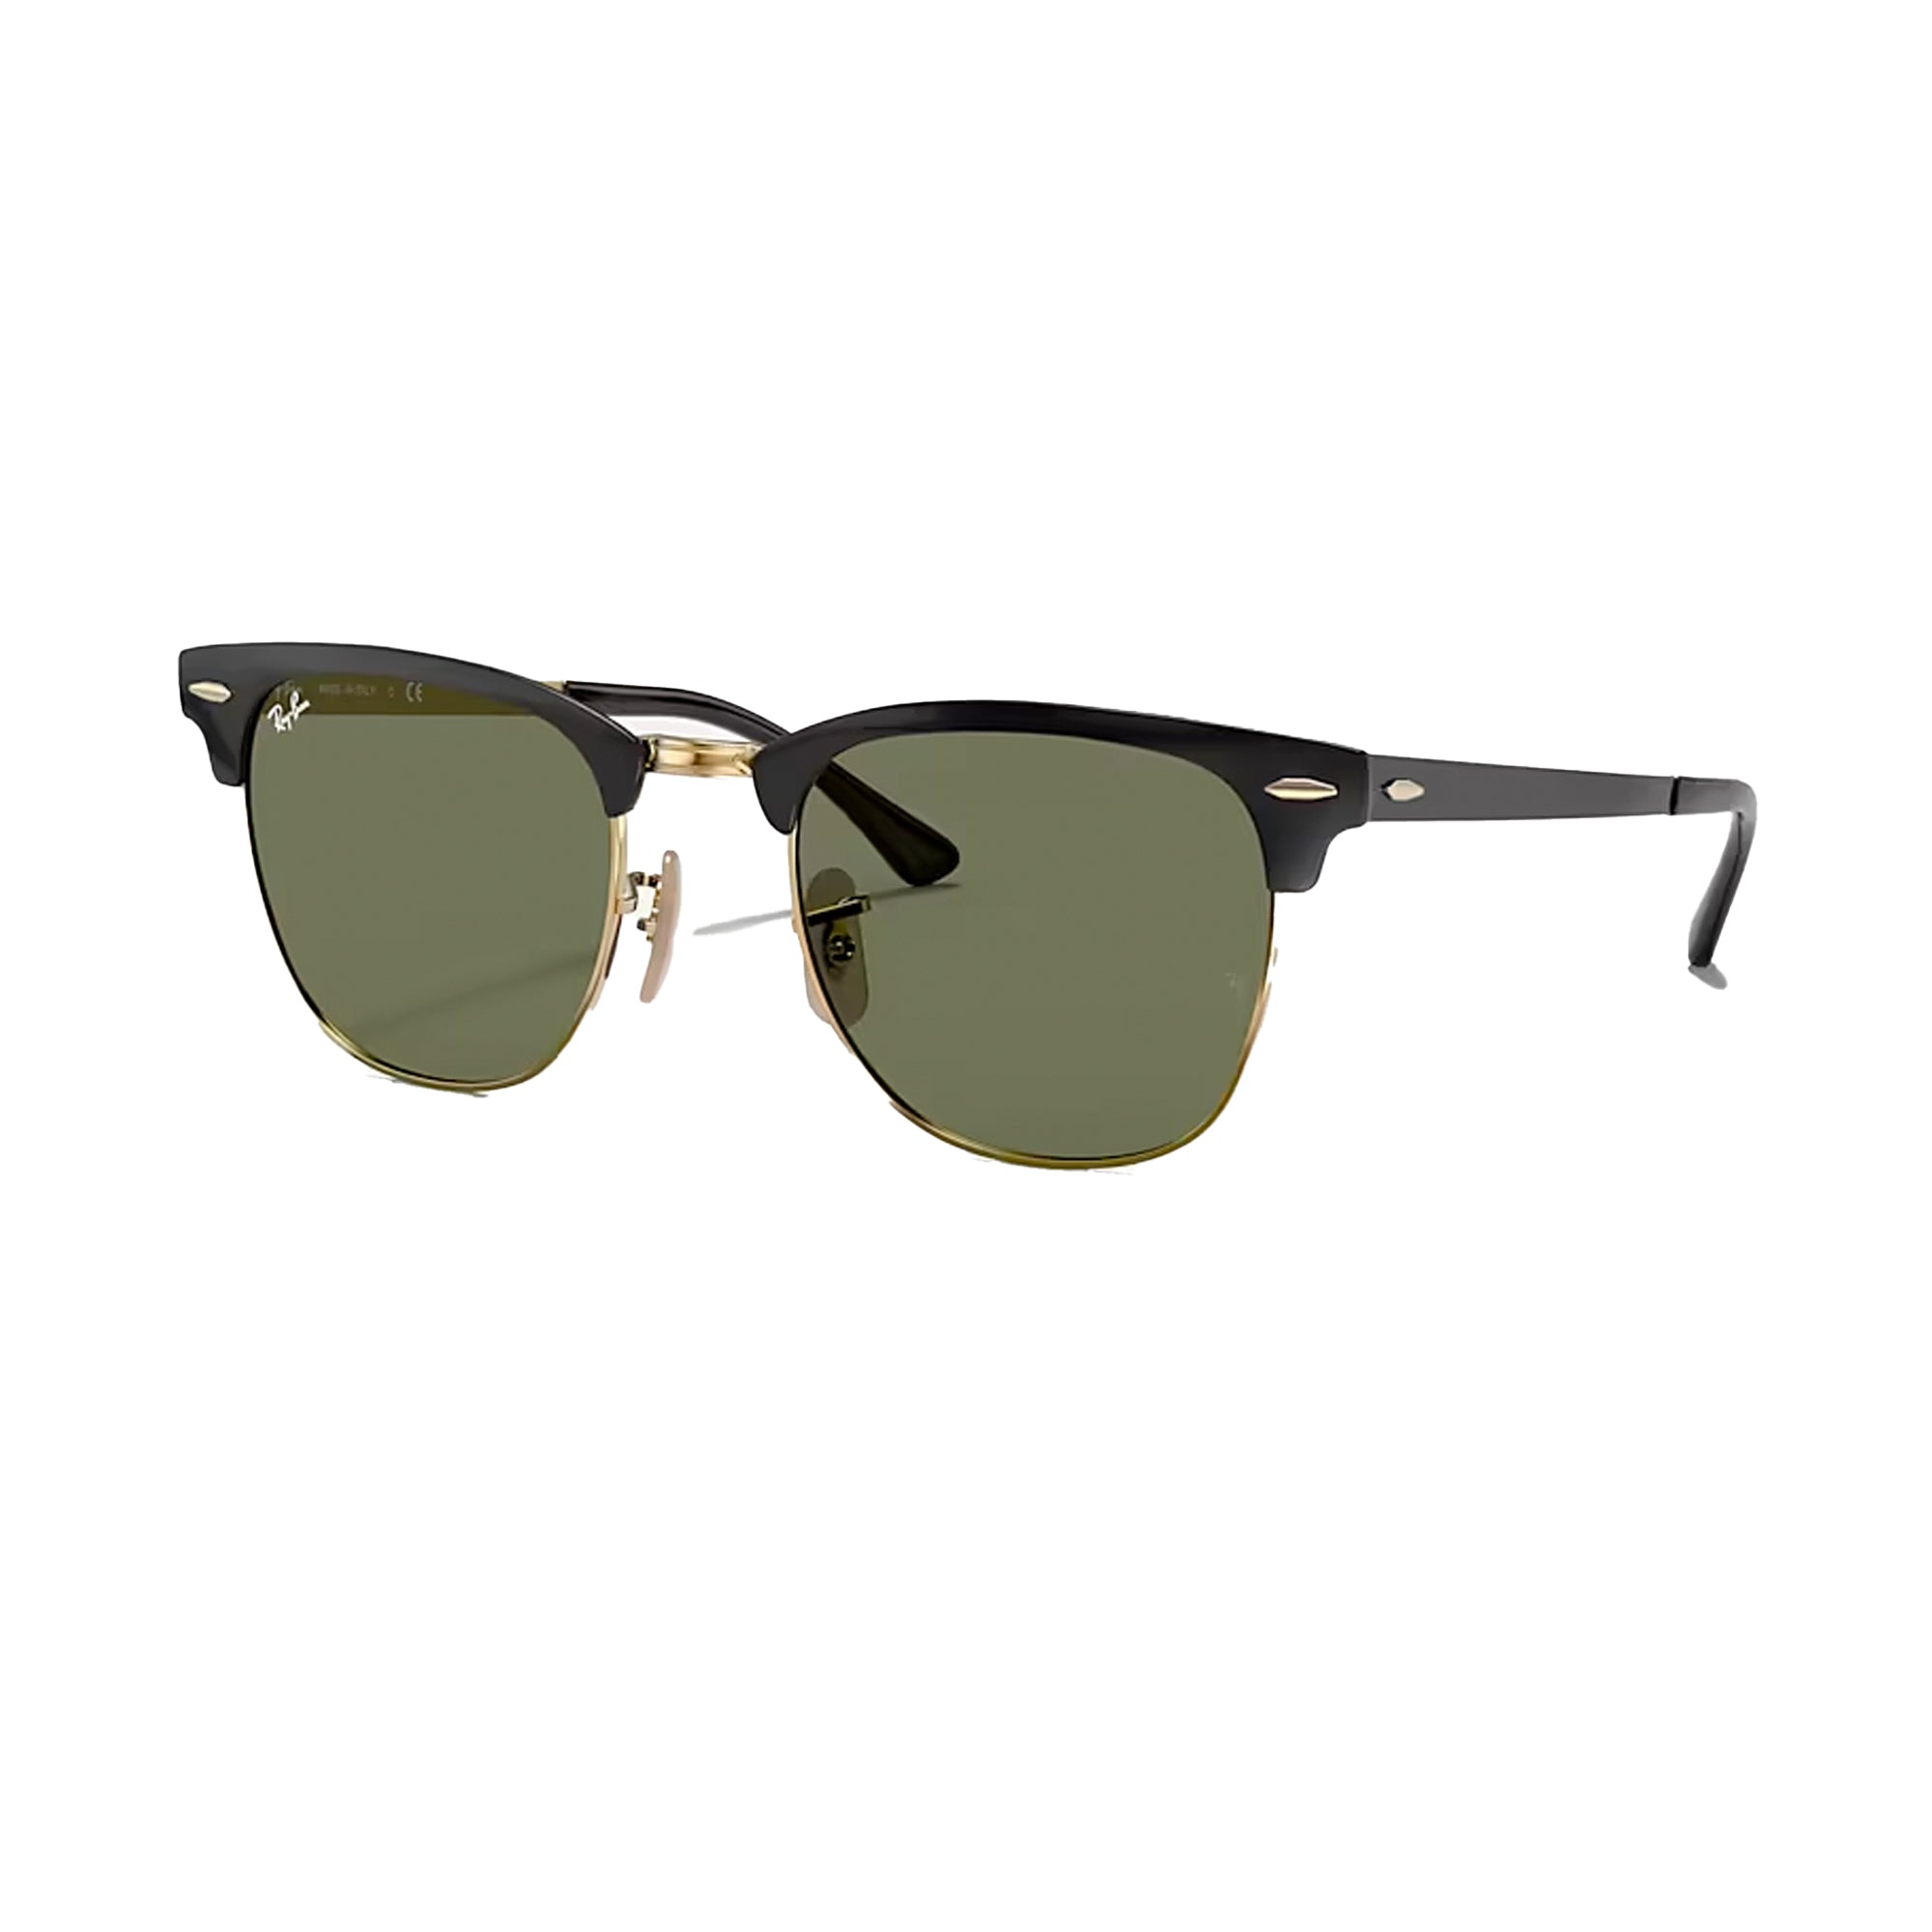 Ray-Ban Sunglasses - Surf Station Store